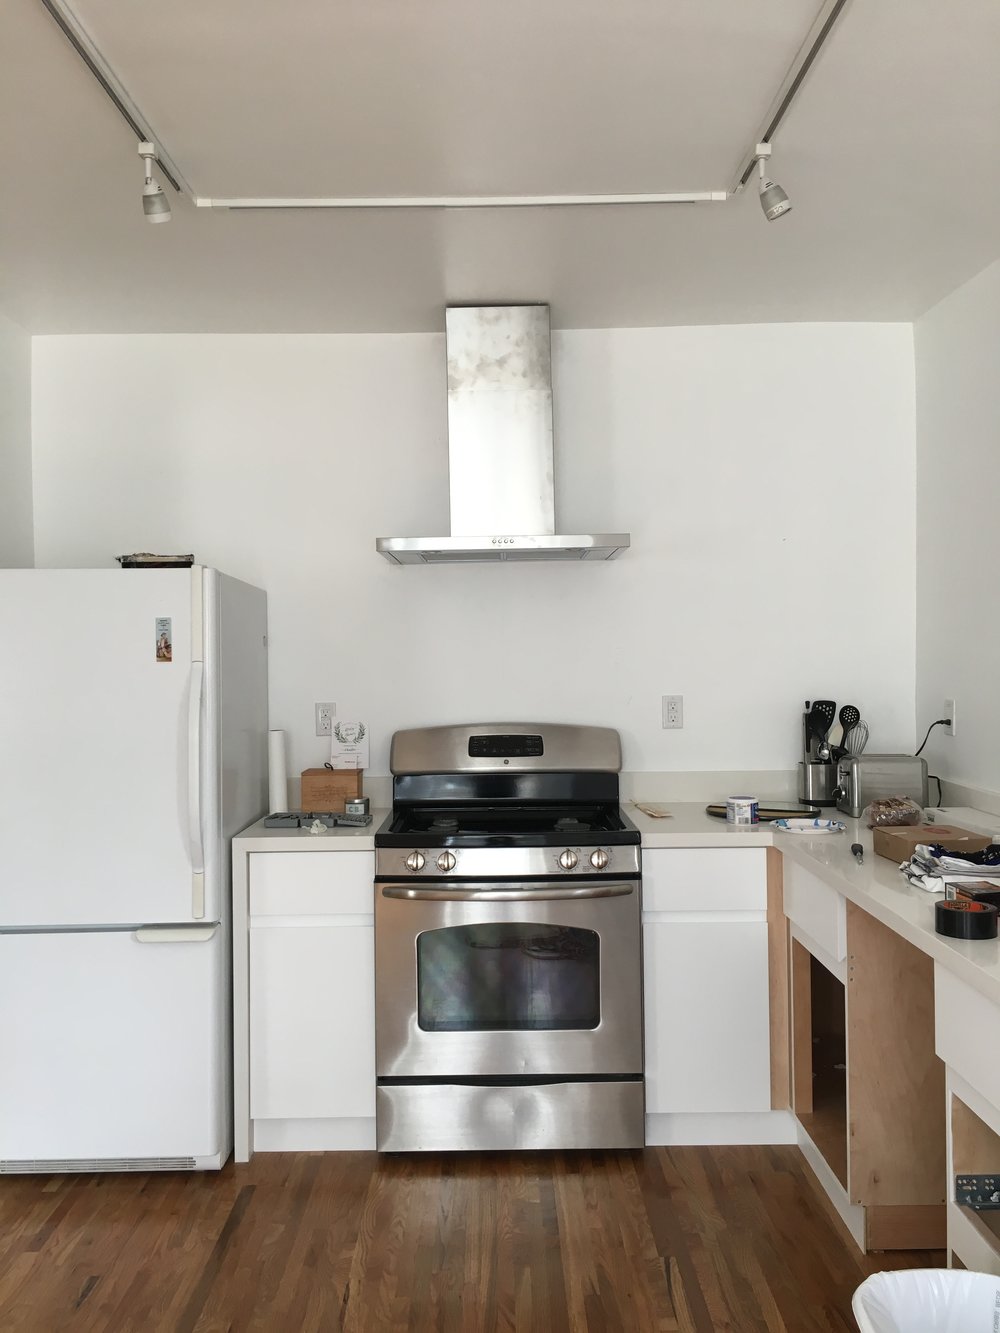  We removed the fan and ceiling mount light and replaced it with track lights to give us more flexibility and control over what we want to light. We also chose this modern hood with a straight base so our floating shelves could but up against it and 